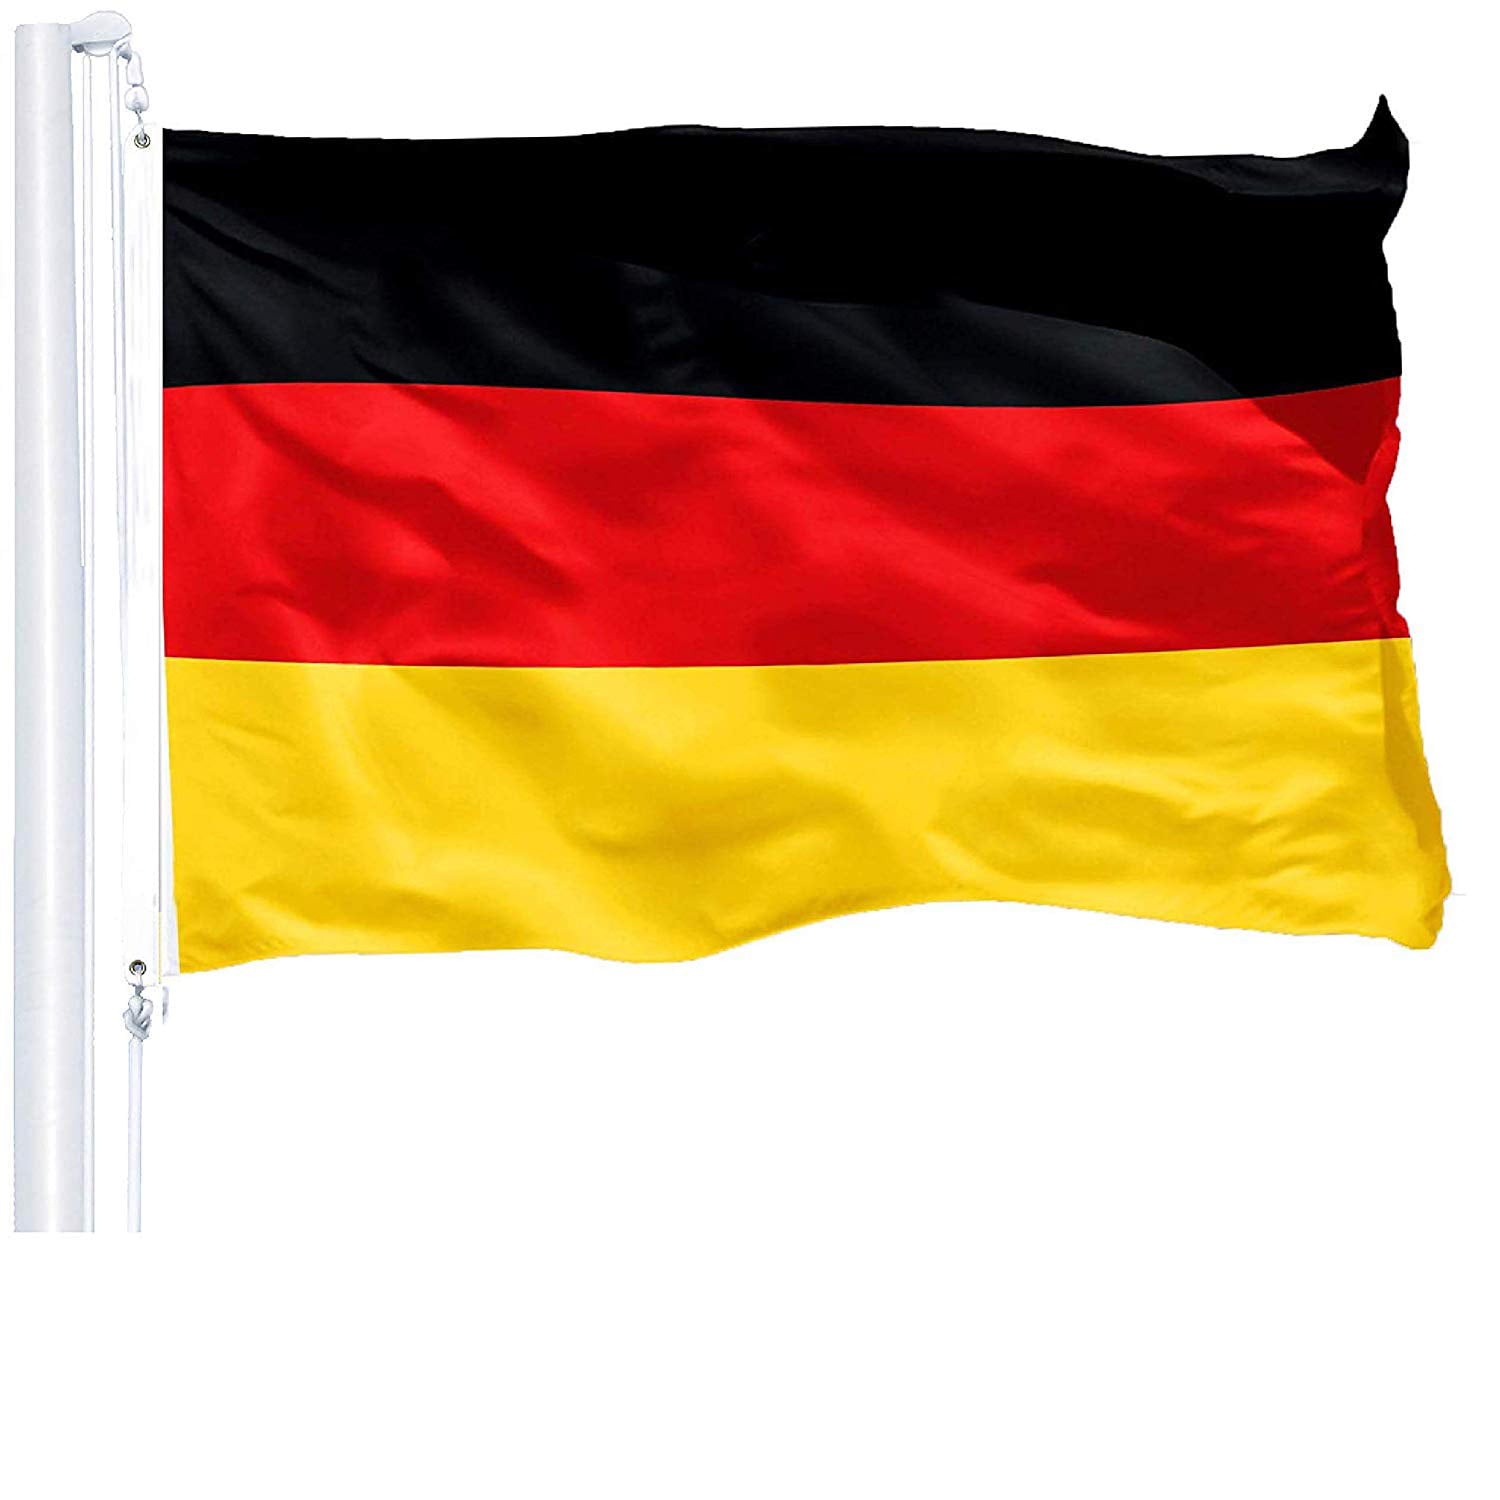 G128 - Germany Flag 3x5 ft Printed with Brass Grommets on 150D Quality ...